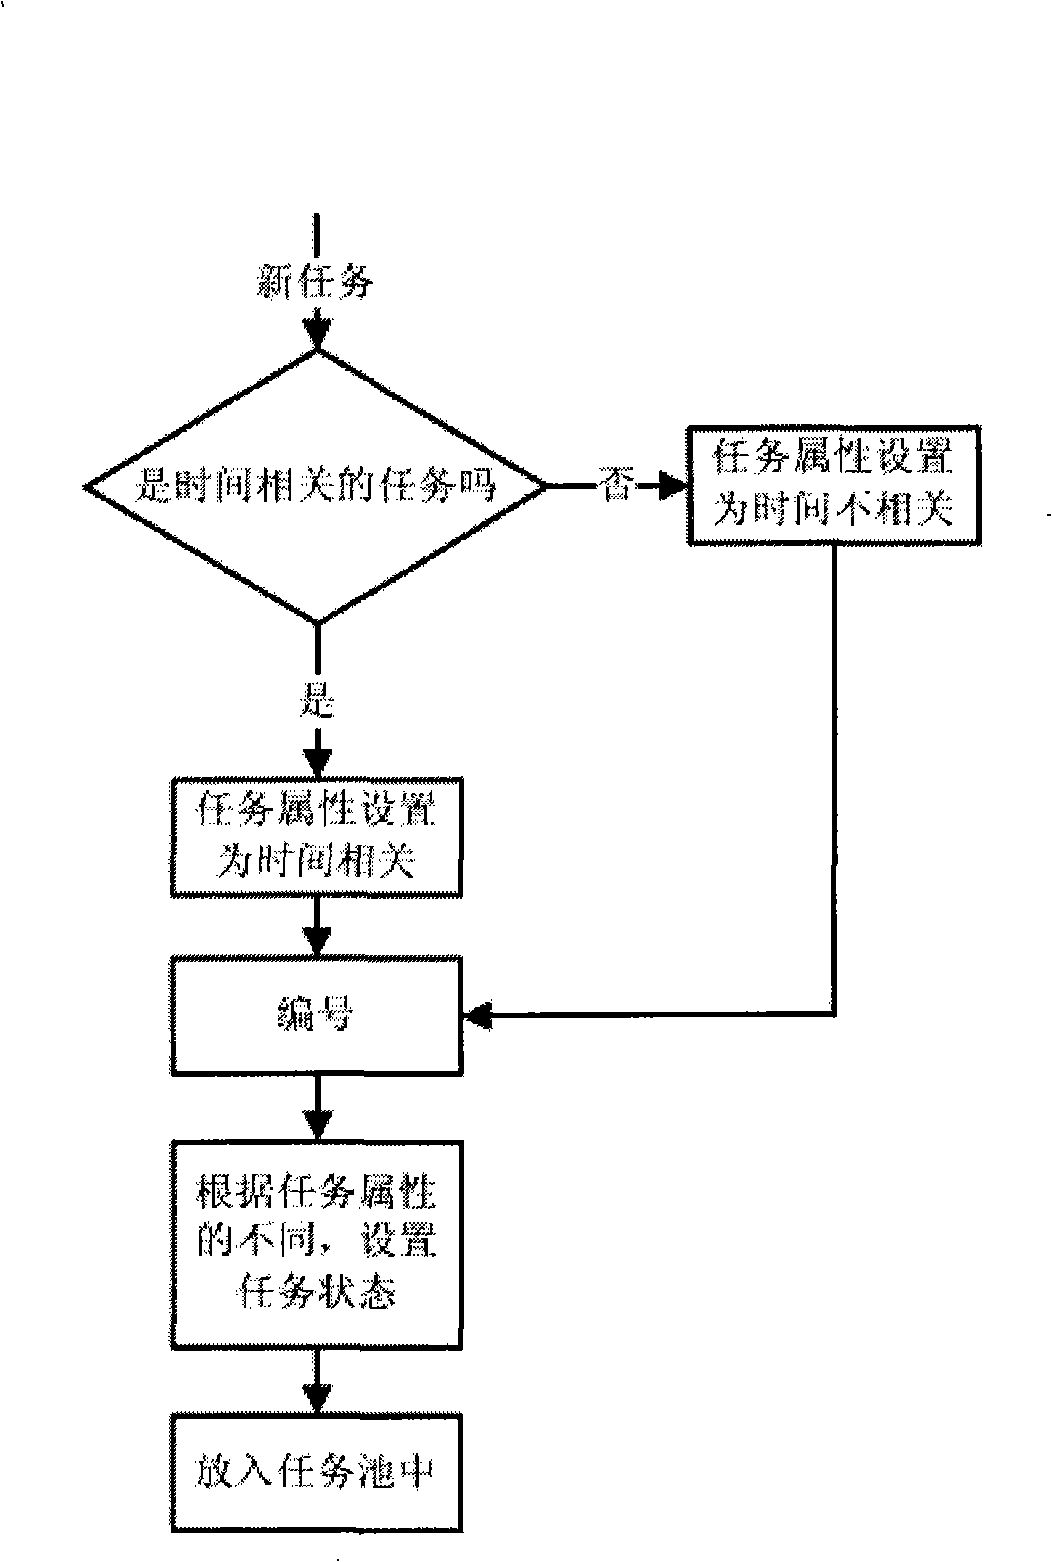 Multi- nuclear DSP system self-adapting task scheduling method